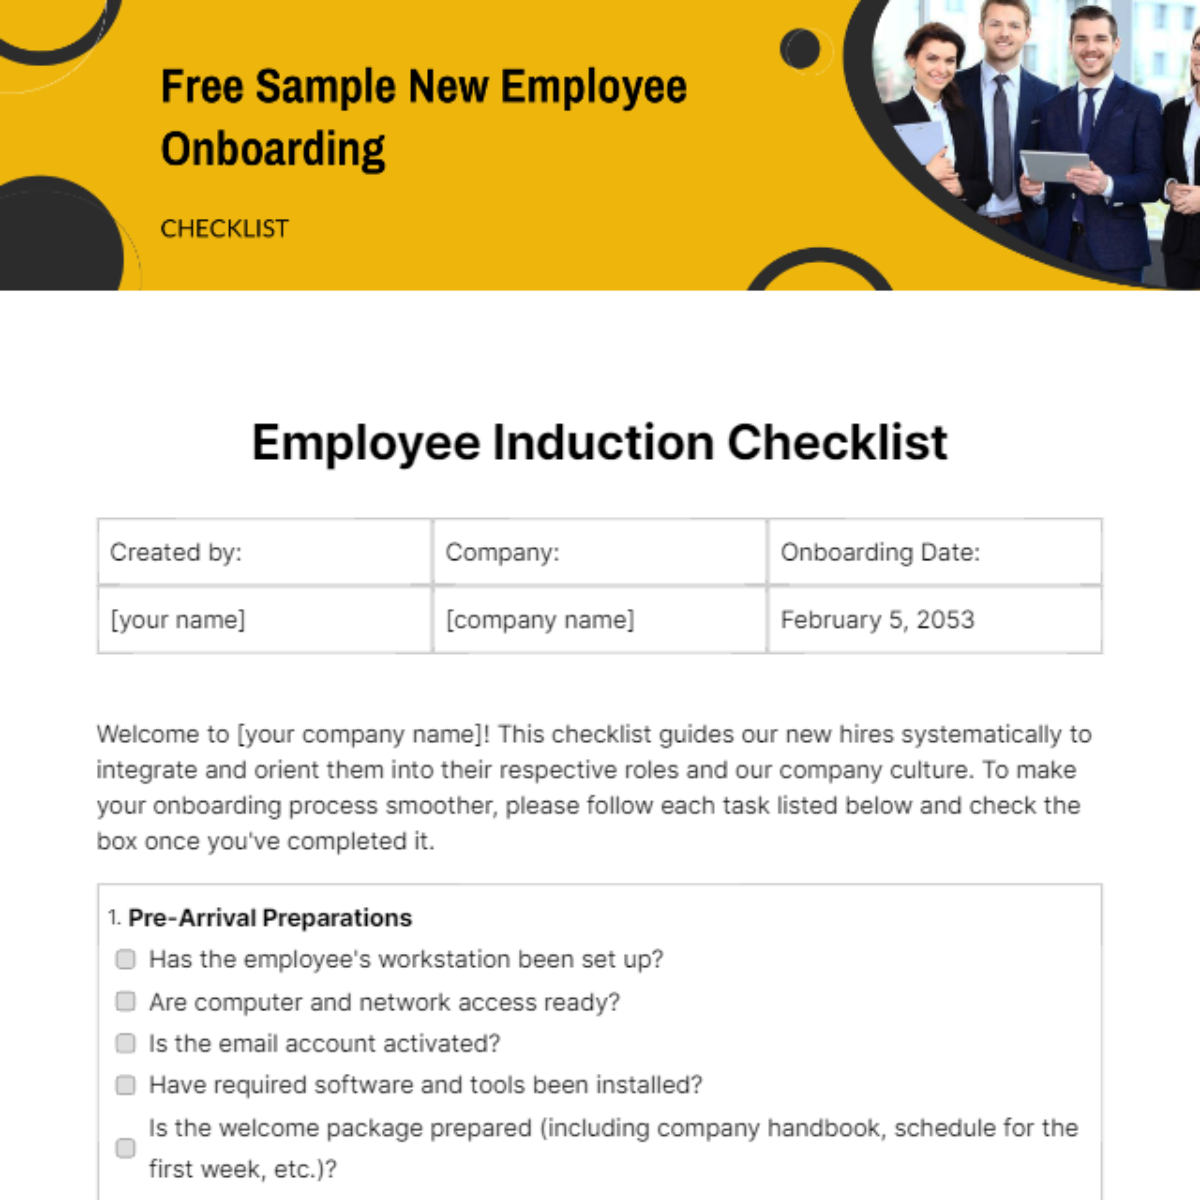 Free Sample New Employee Onboarding Checklist Template